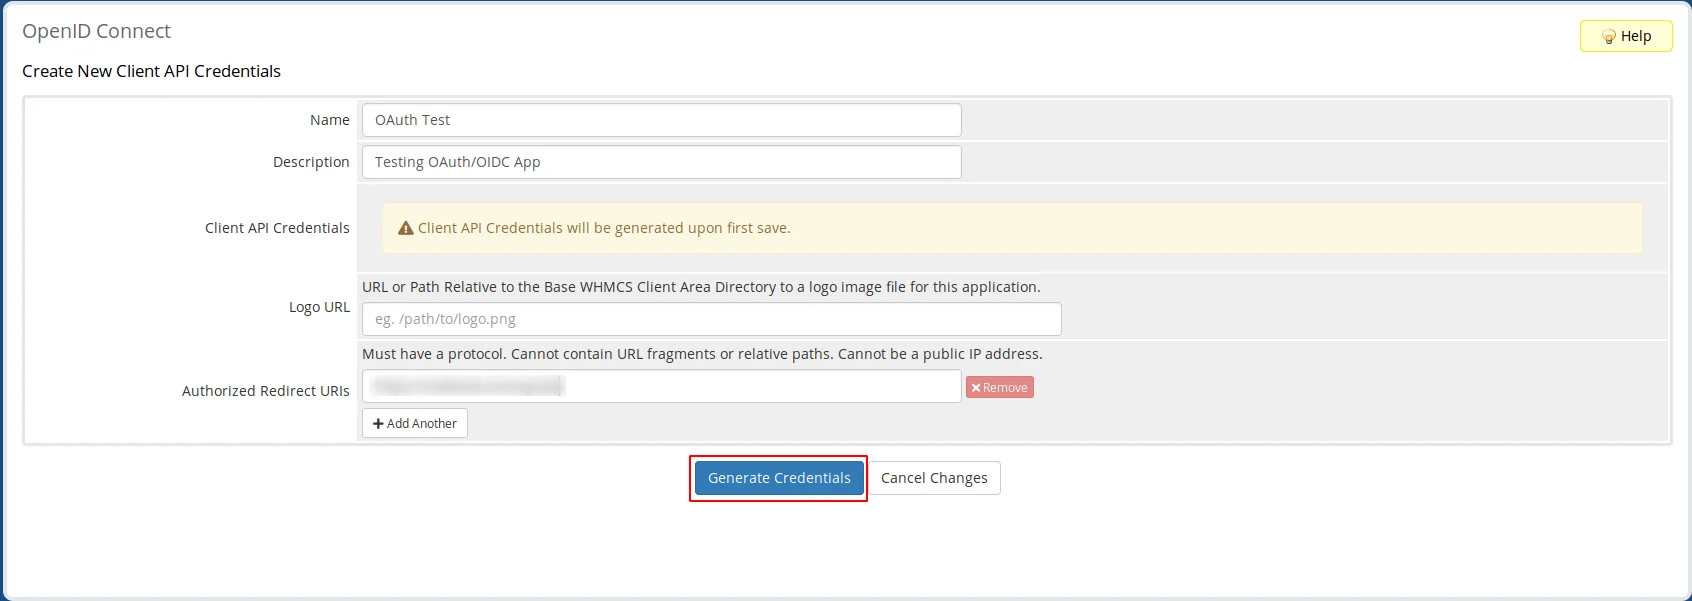 DNN WHMCS OAuth SSO - Configure New Client